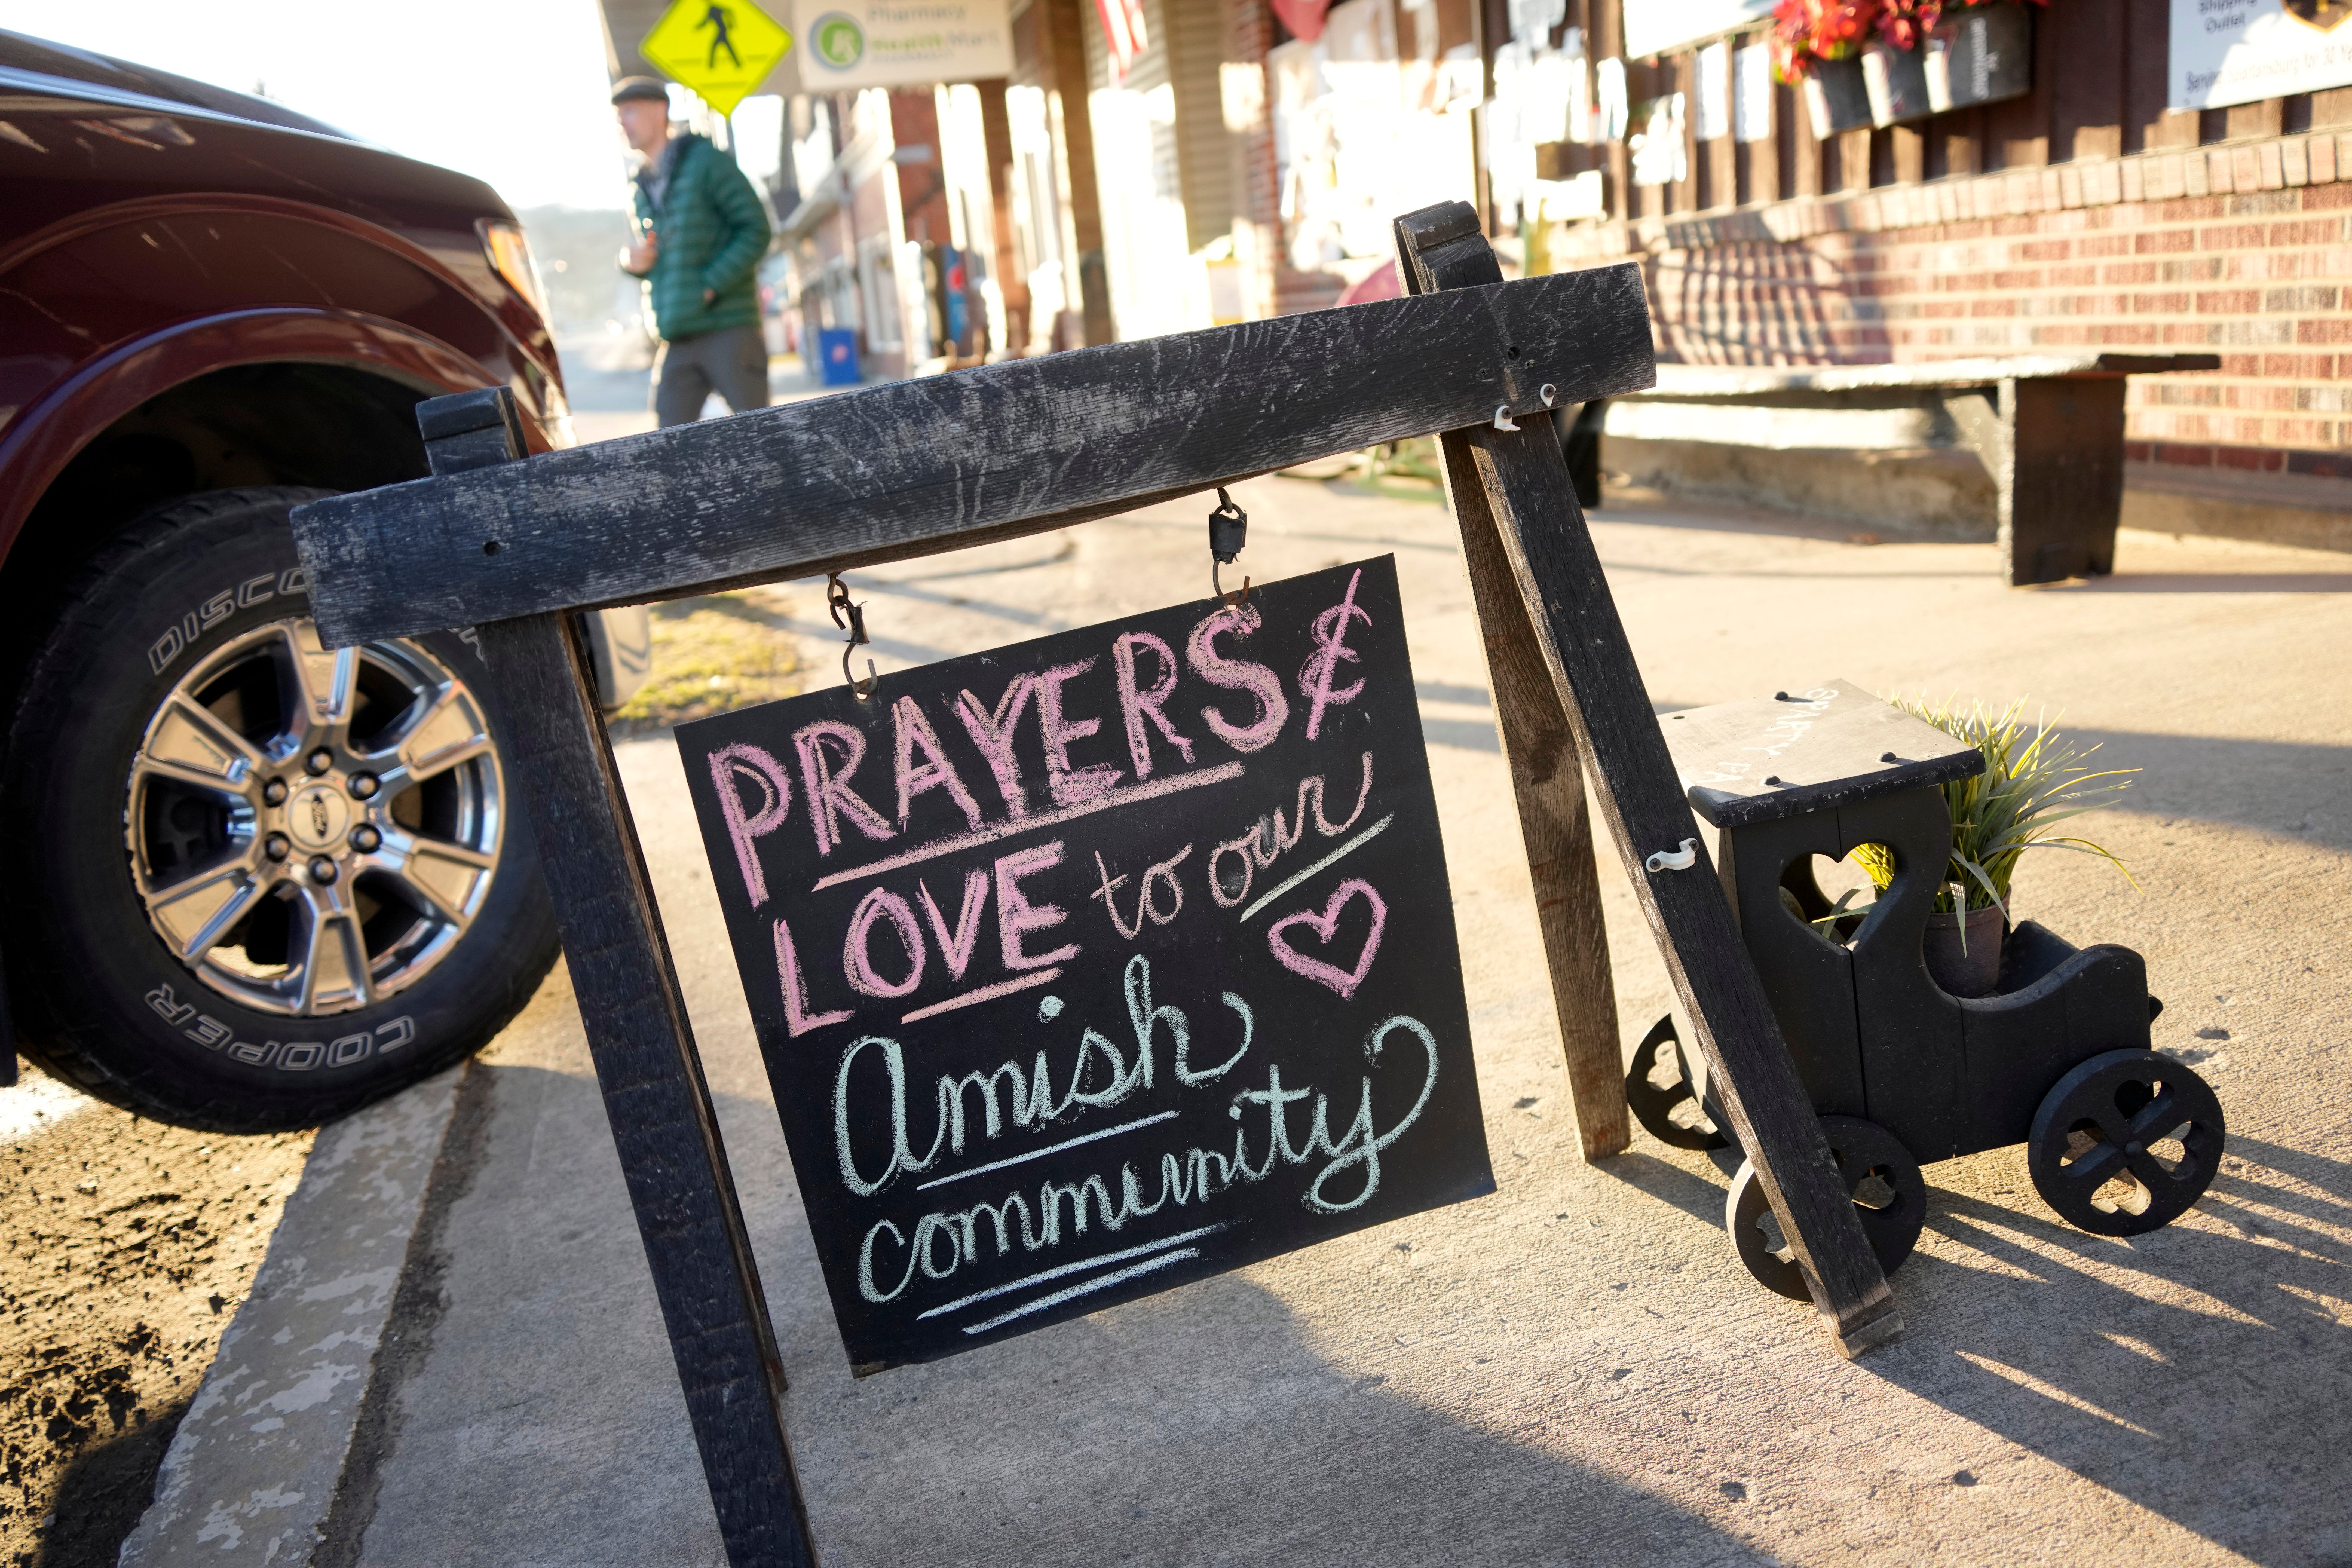 A sign on the sidewalk outside an antique store in Spartan pays tribute to the slain woman